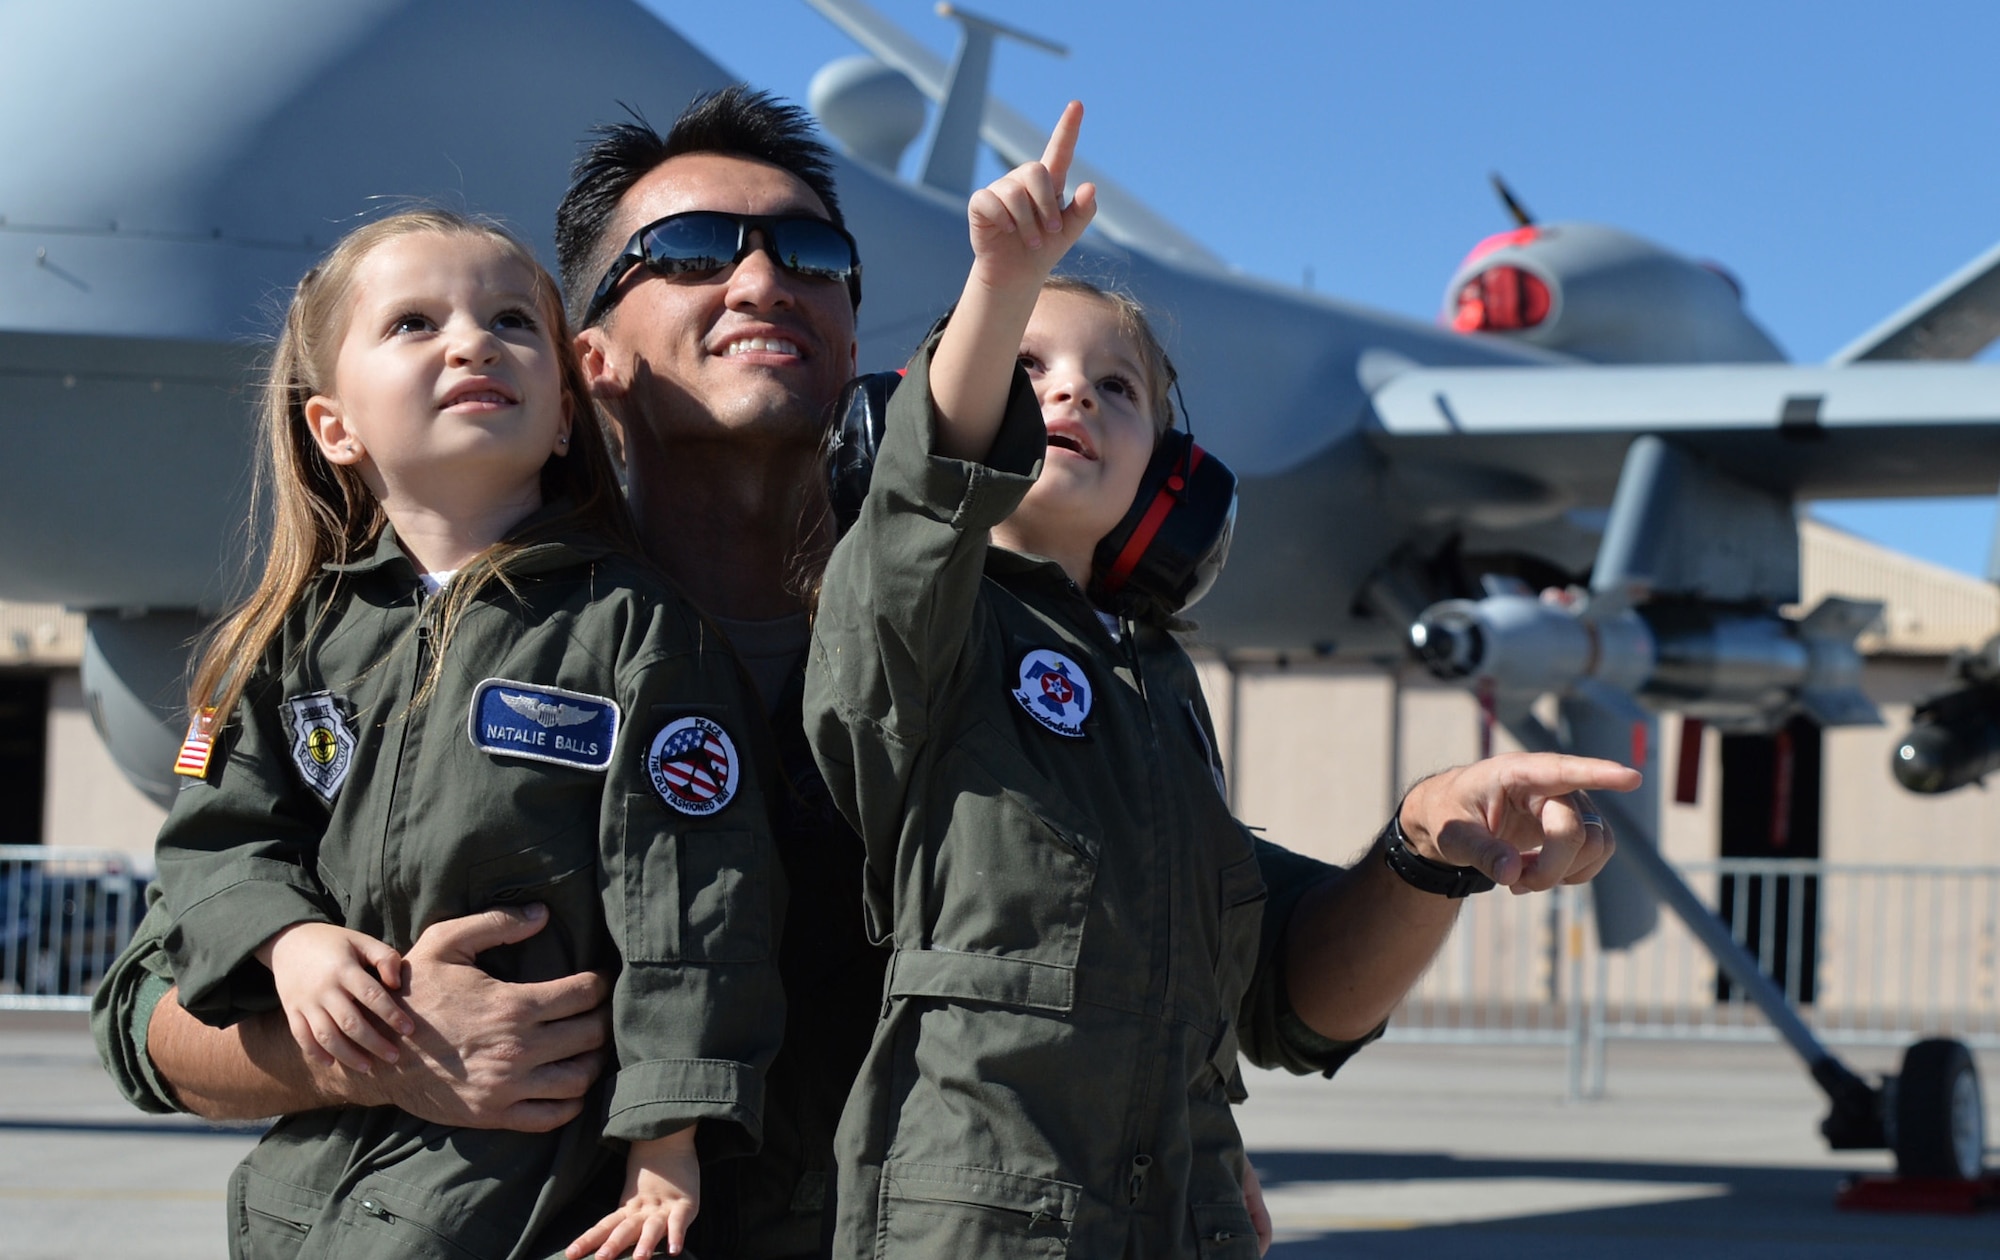 Natalie and Melanie watch the Legacy Bombers fly with their father Capt. Eric for the friends and family day at the 2014 Open House on Nellis Air Force Base, Nev., Nov. 7, 2014. The Open House is a two-day event that will depict the history of American aviation and salute recent accomplishments of America's military in operations around the globe through numerous military and civilian ground displays. (U.S. Air Force photo by Tech. Sgt. Nadine Barclay/Released) (Names withheld for security)